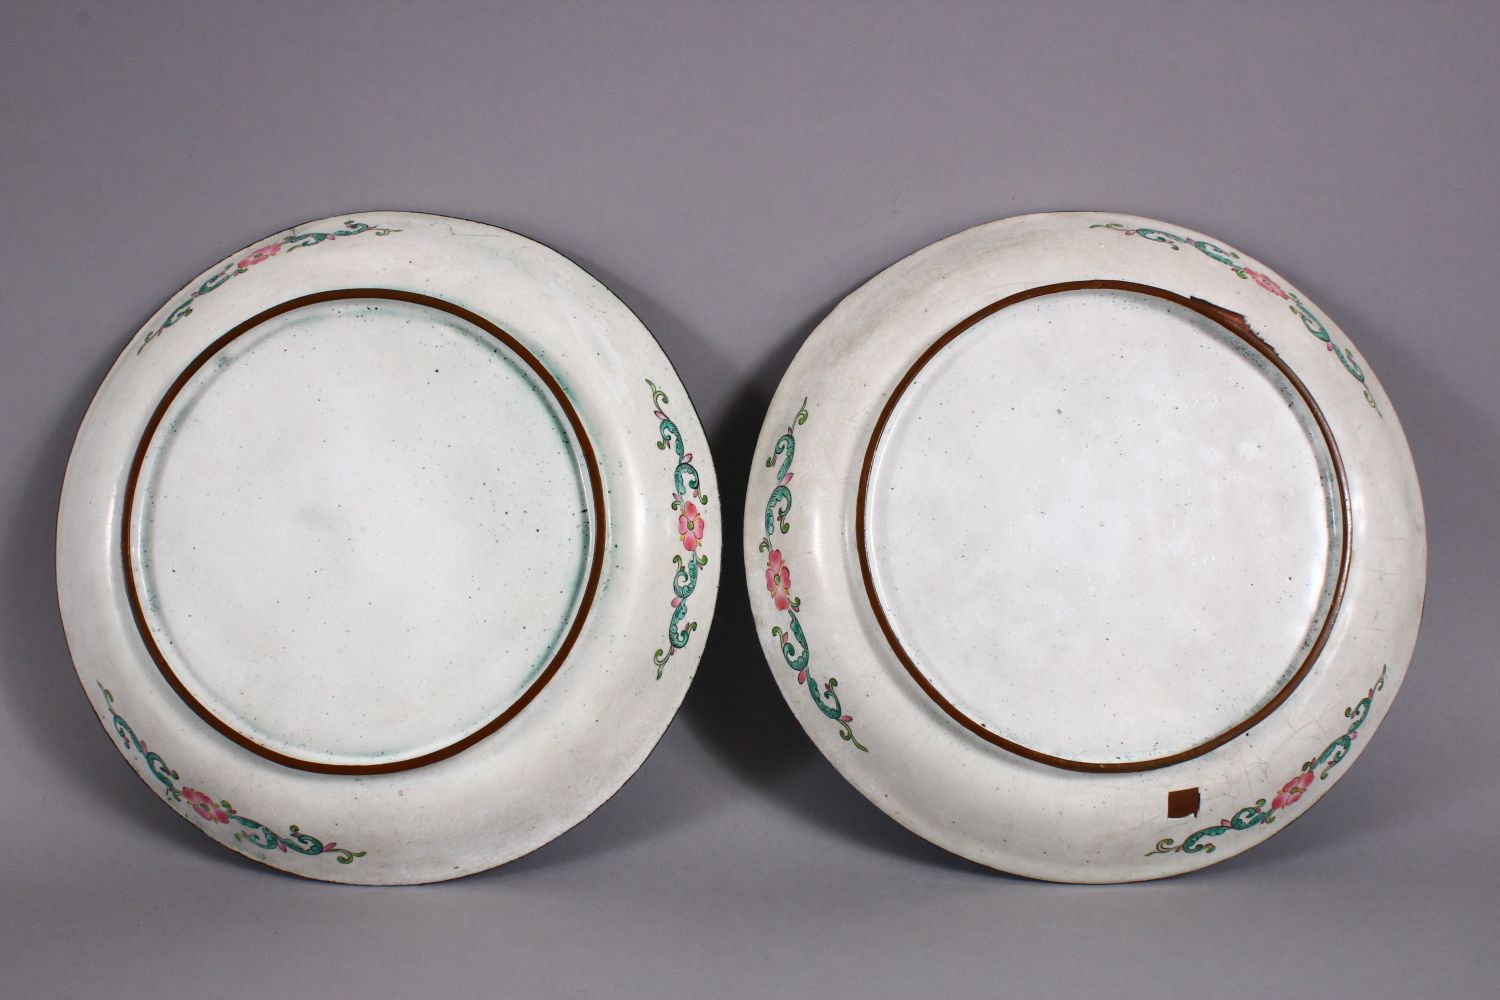 A PAIR OF 19TH / 20TH CENTURY CHINESE ENAMEL SAUCER DISHES, each decorated witih scenes of a bird in - Image 4 of 4